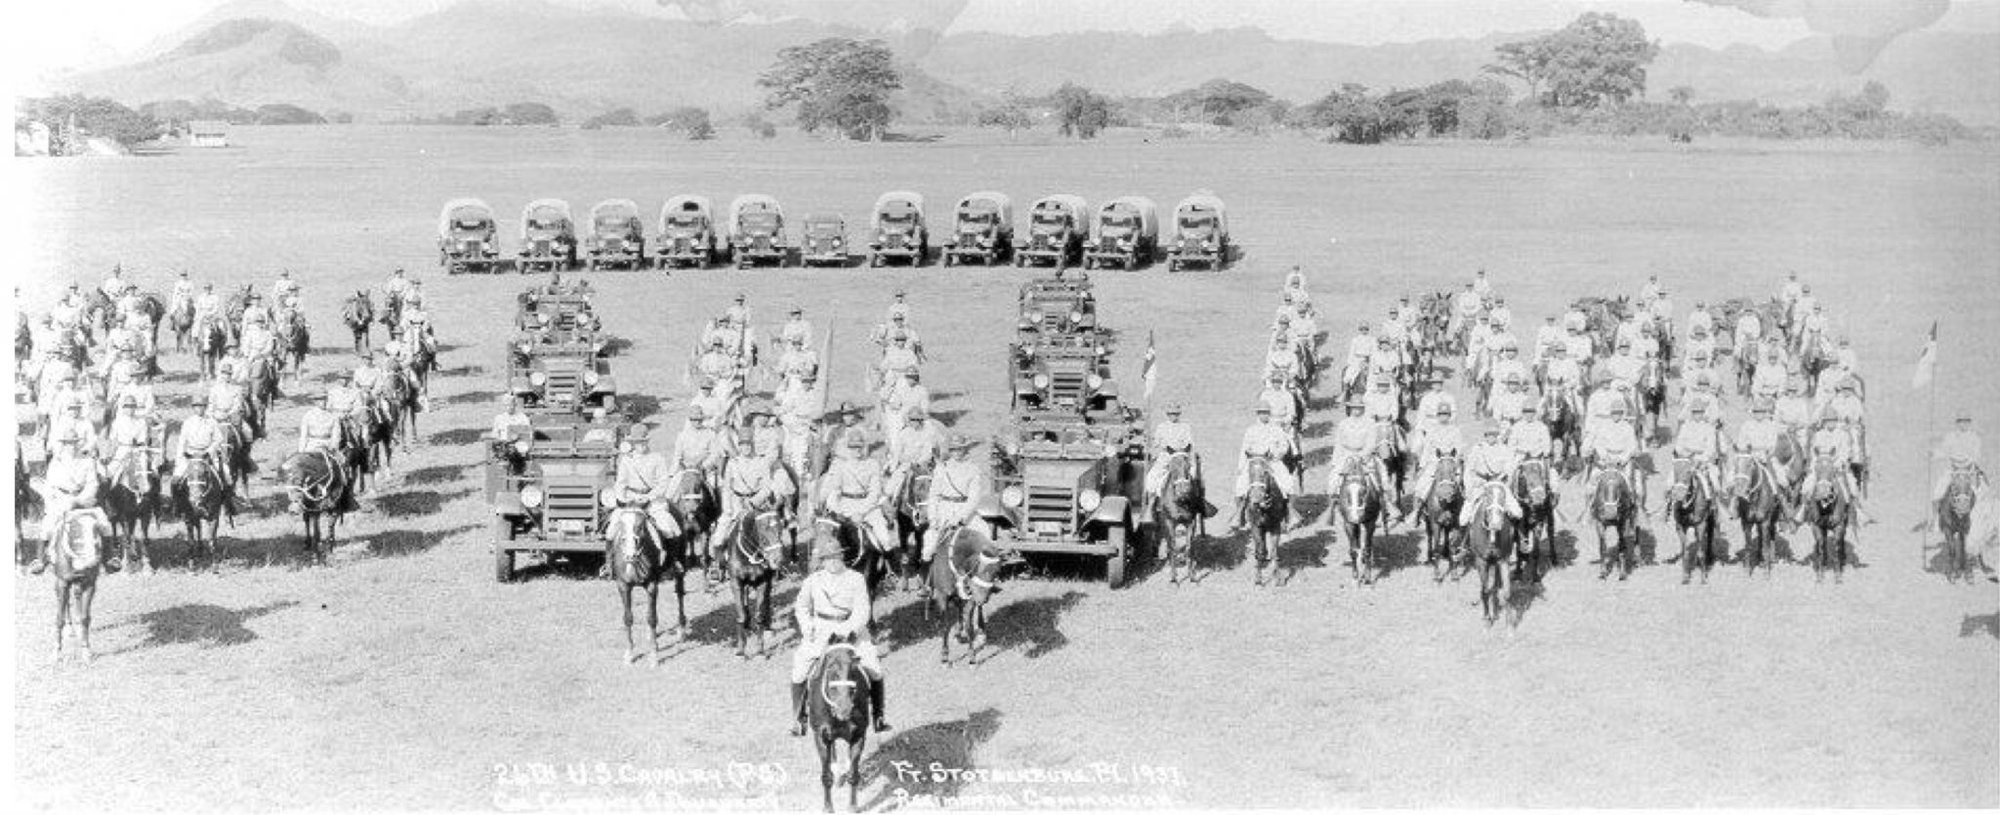 Part of the 26th Cavalry (Philippine Scouts) with scout cars and horses at Fort Stotsenburg. Photo courtesy of the Philippine Scouts Heritage Society.